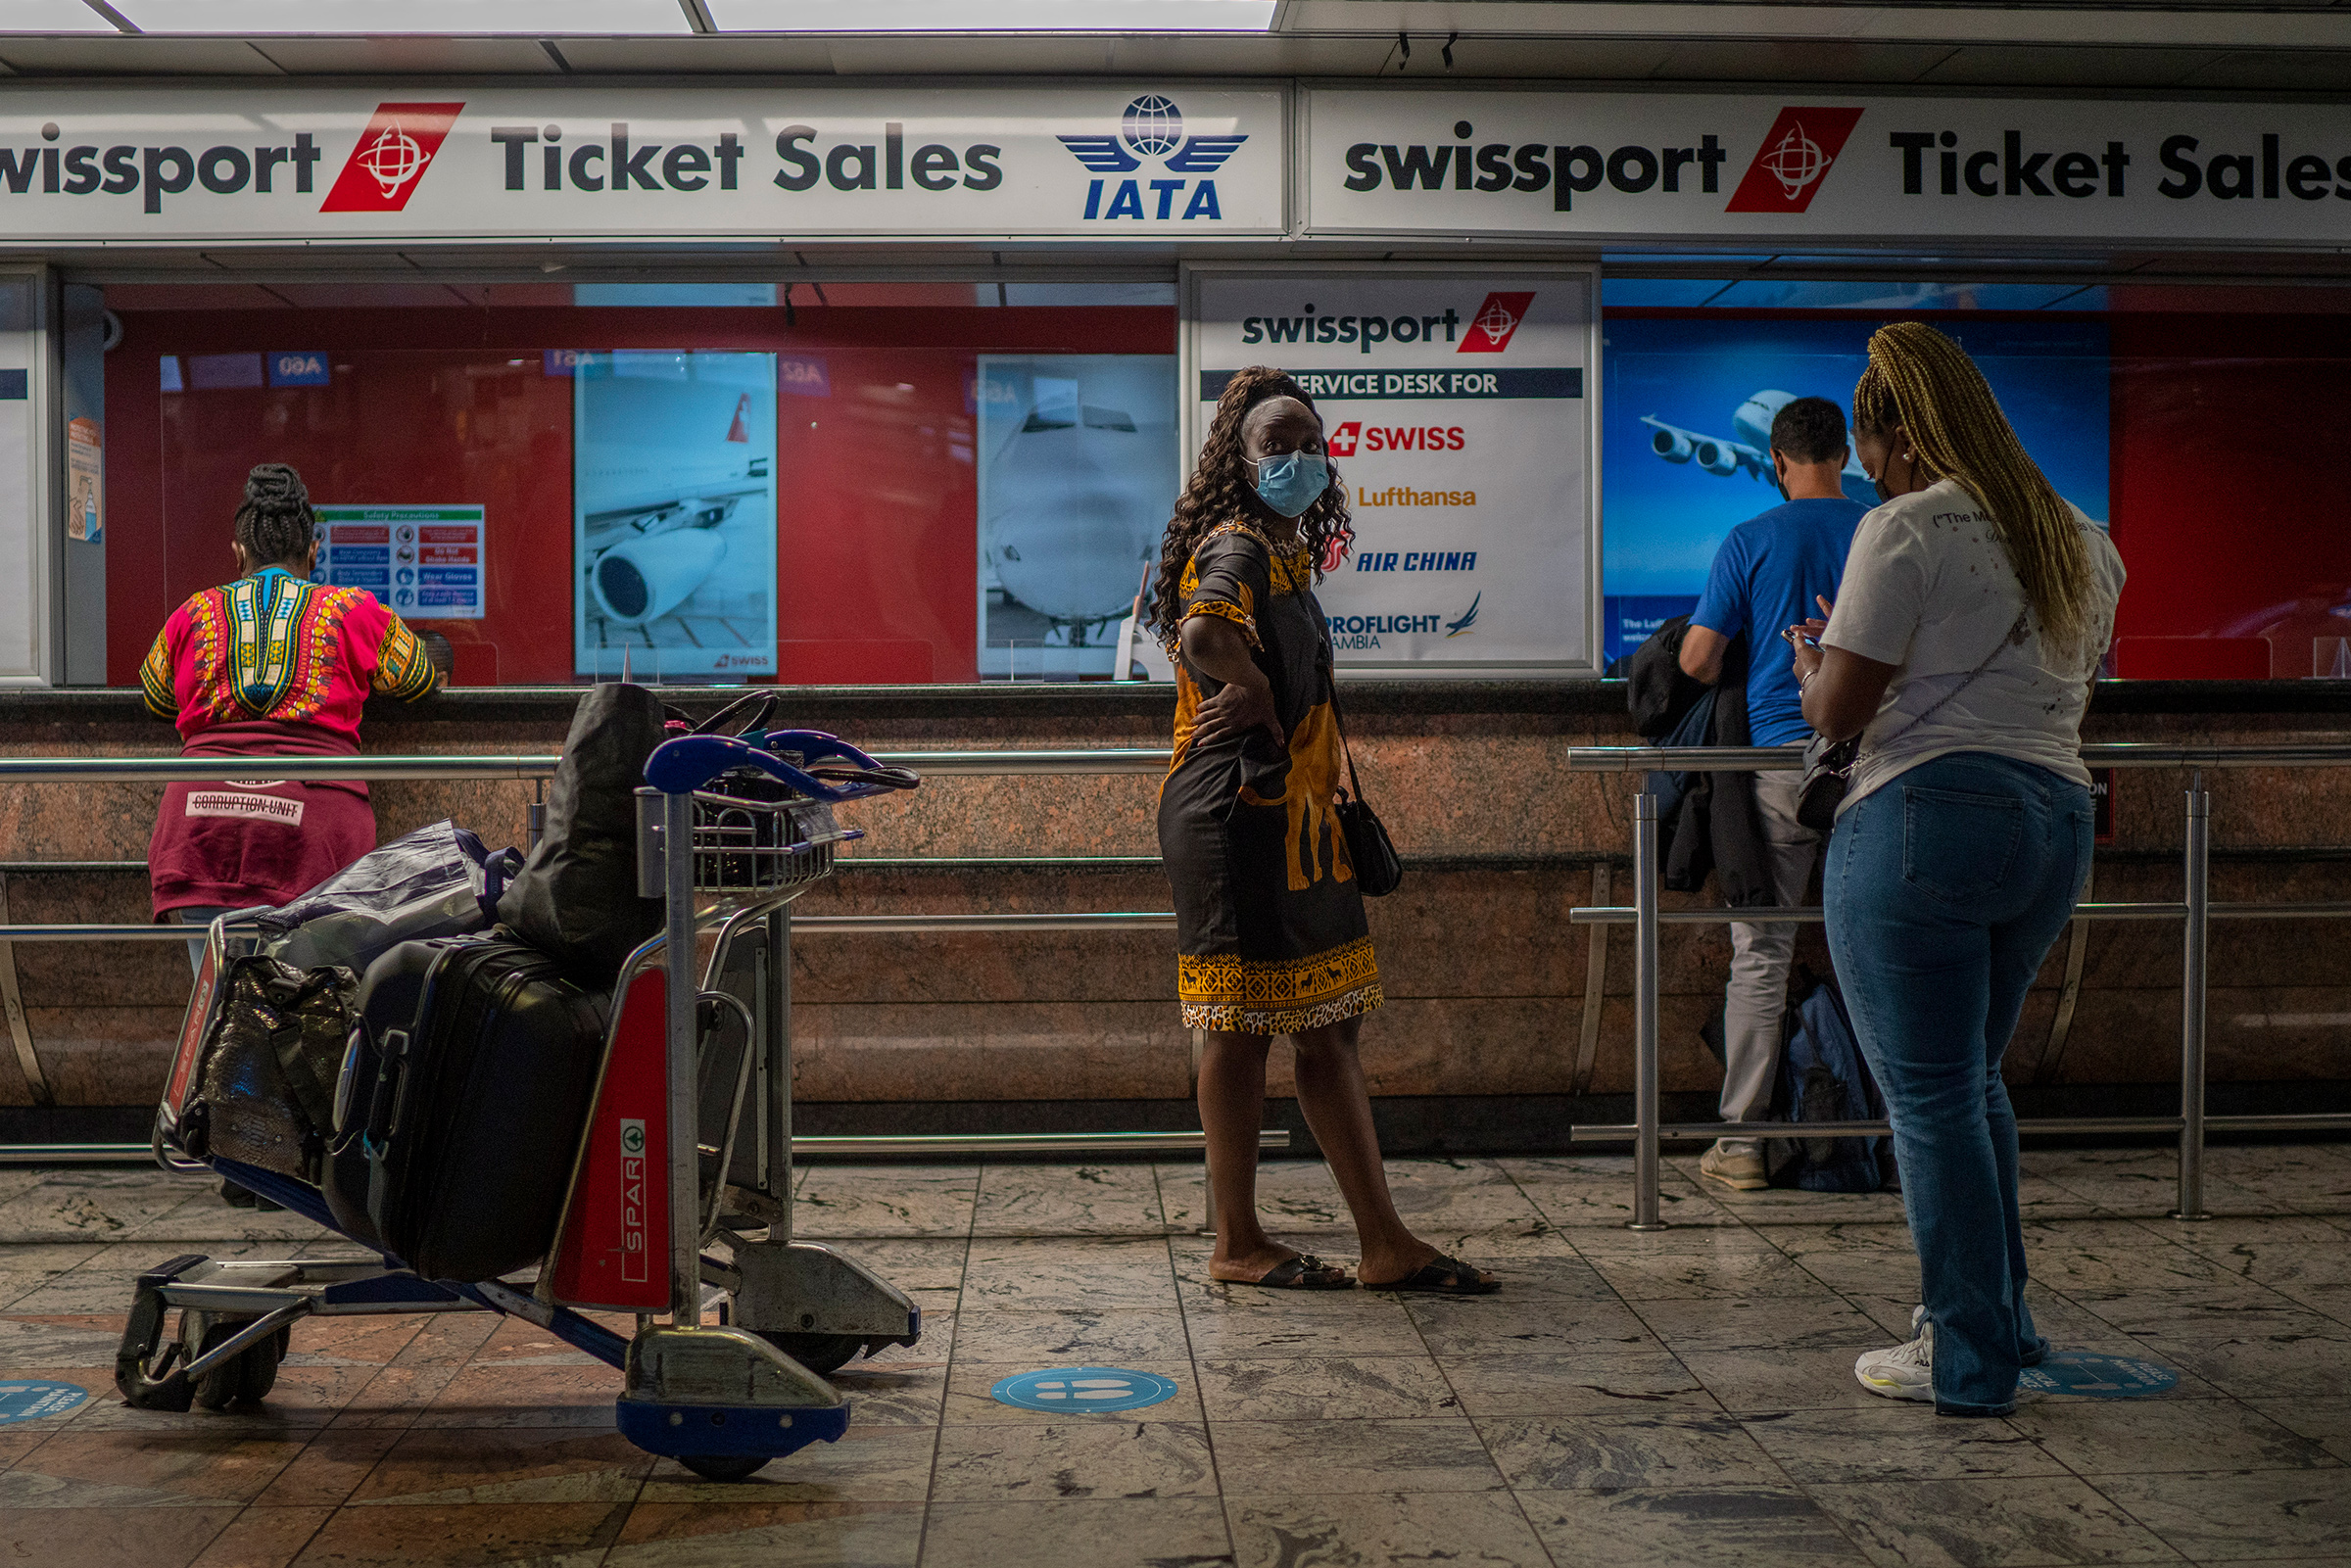 Passengers wait at a ticket counter at Johannesburg's O.R. Tambo's airport on Nov. 29. A pandemic-weary world faces weeks of confusing uncertainty as countries restrict travel and take other steps to halt the newest potentially risky coronavirus mutant before anyone knows just how dangerous omicron is. (Jerome Delay—AP)